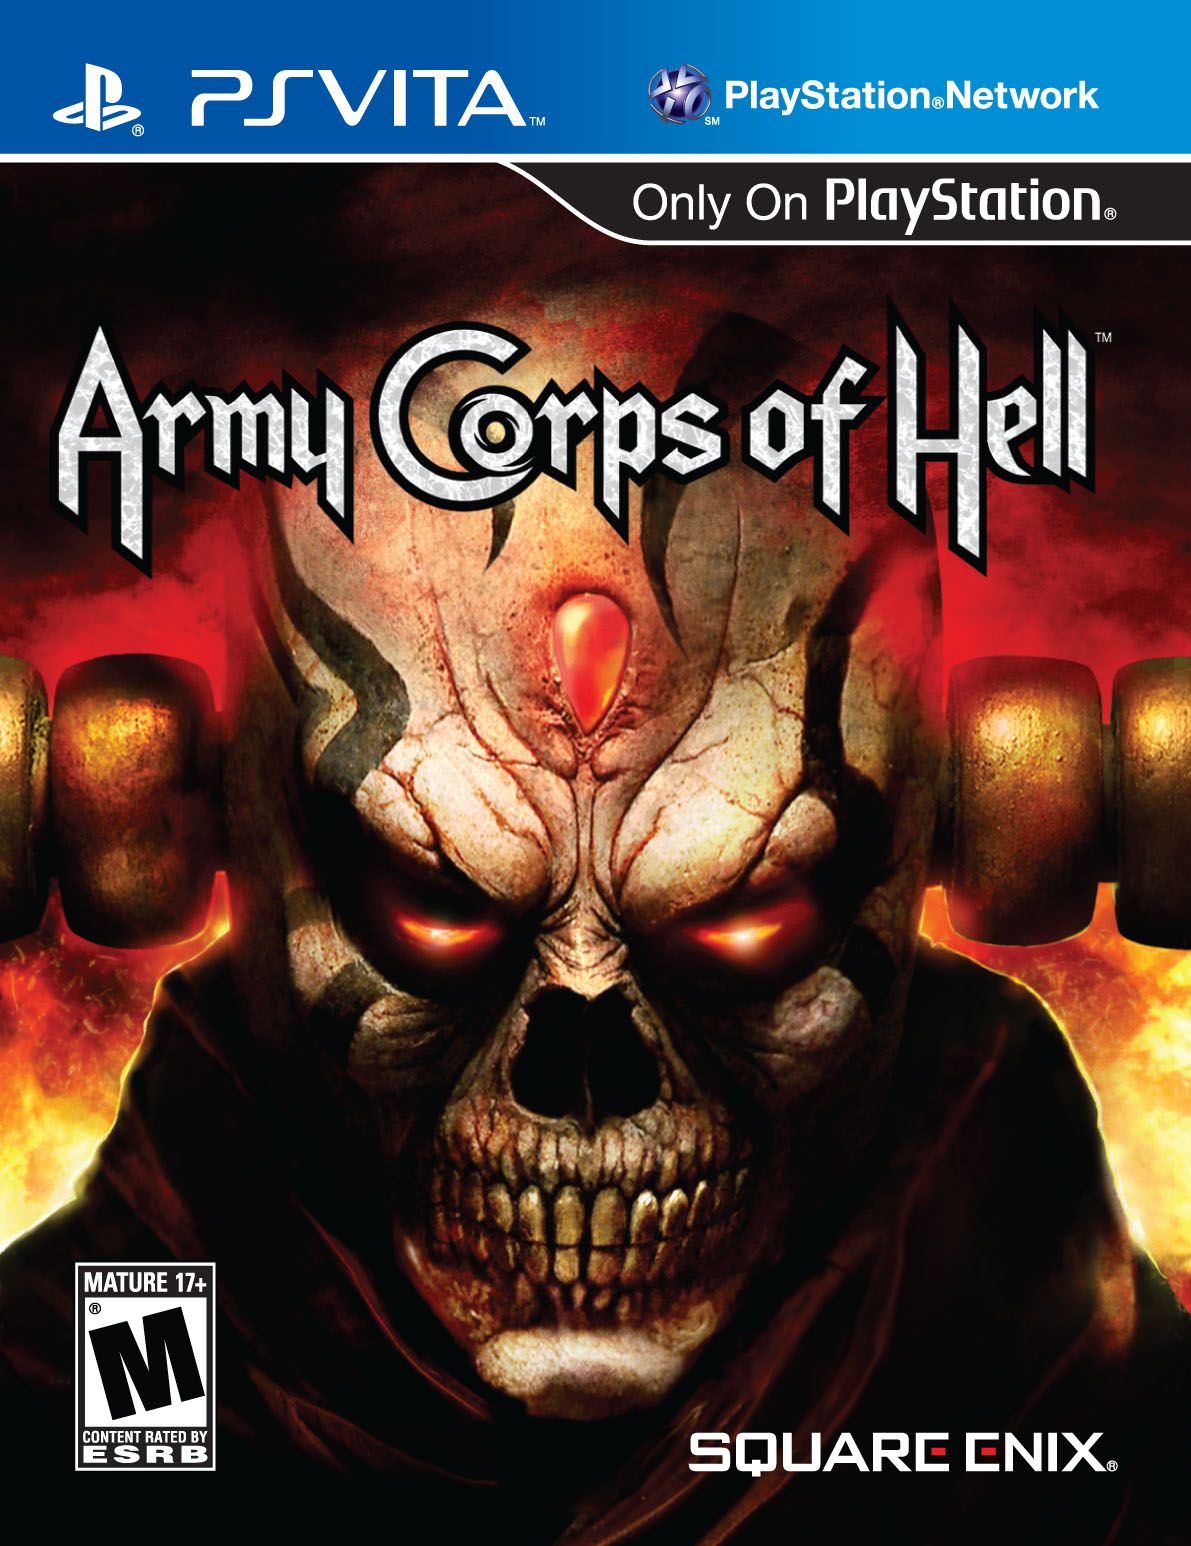 Army Corps Of Hell #24